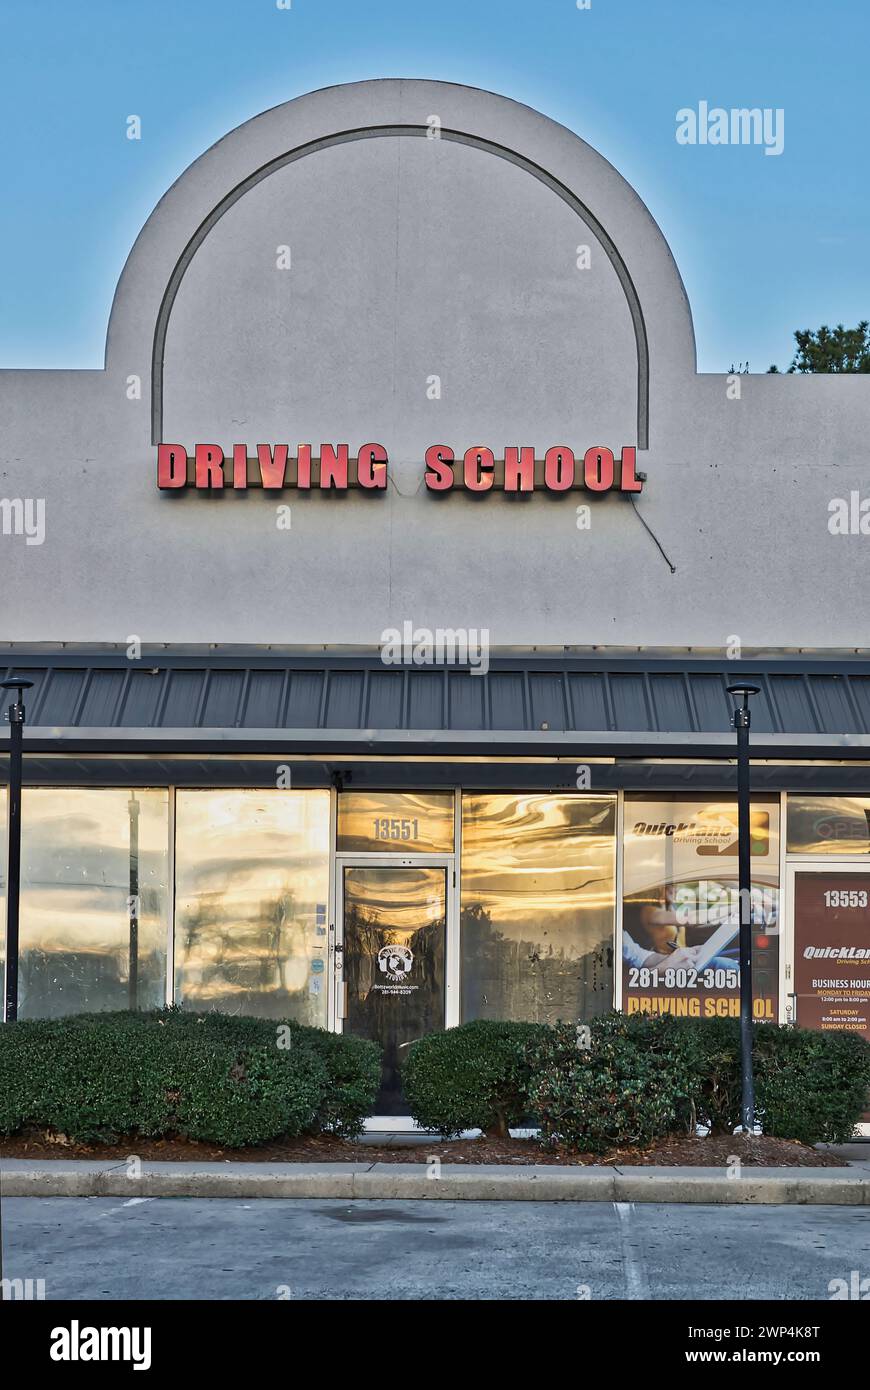 Houston, Texas USA 02-18-2024: Quick Lane Driving School building location in a Houston, TX strip mall. Driver education business storefront. Stock Photo